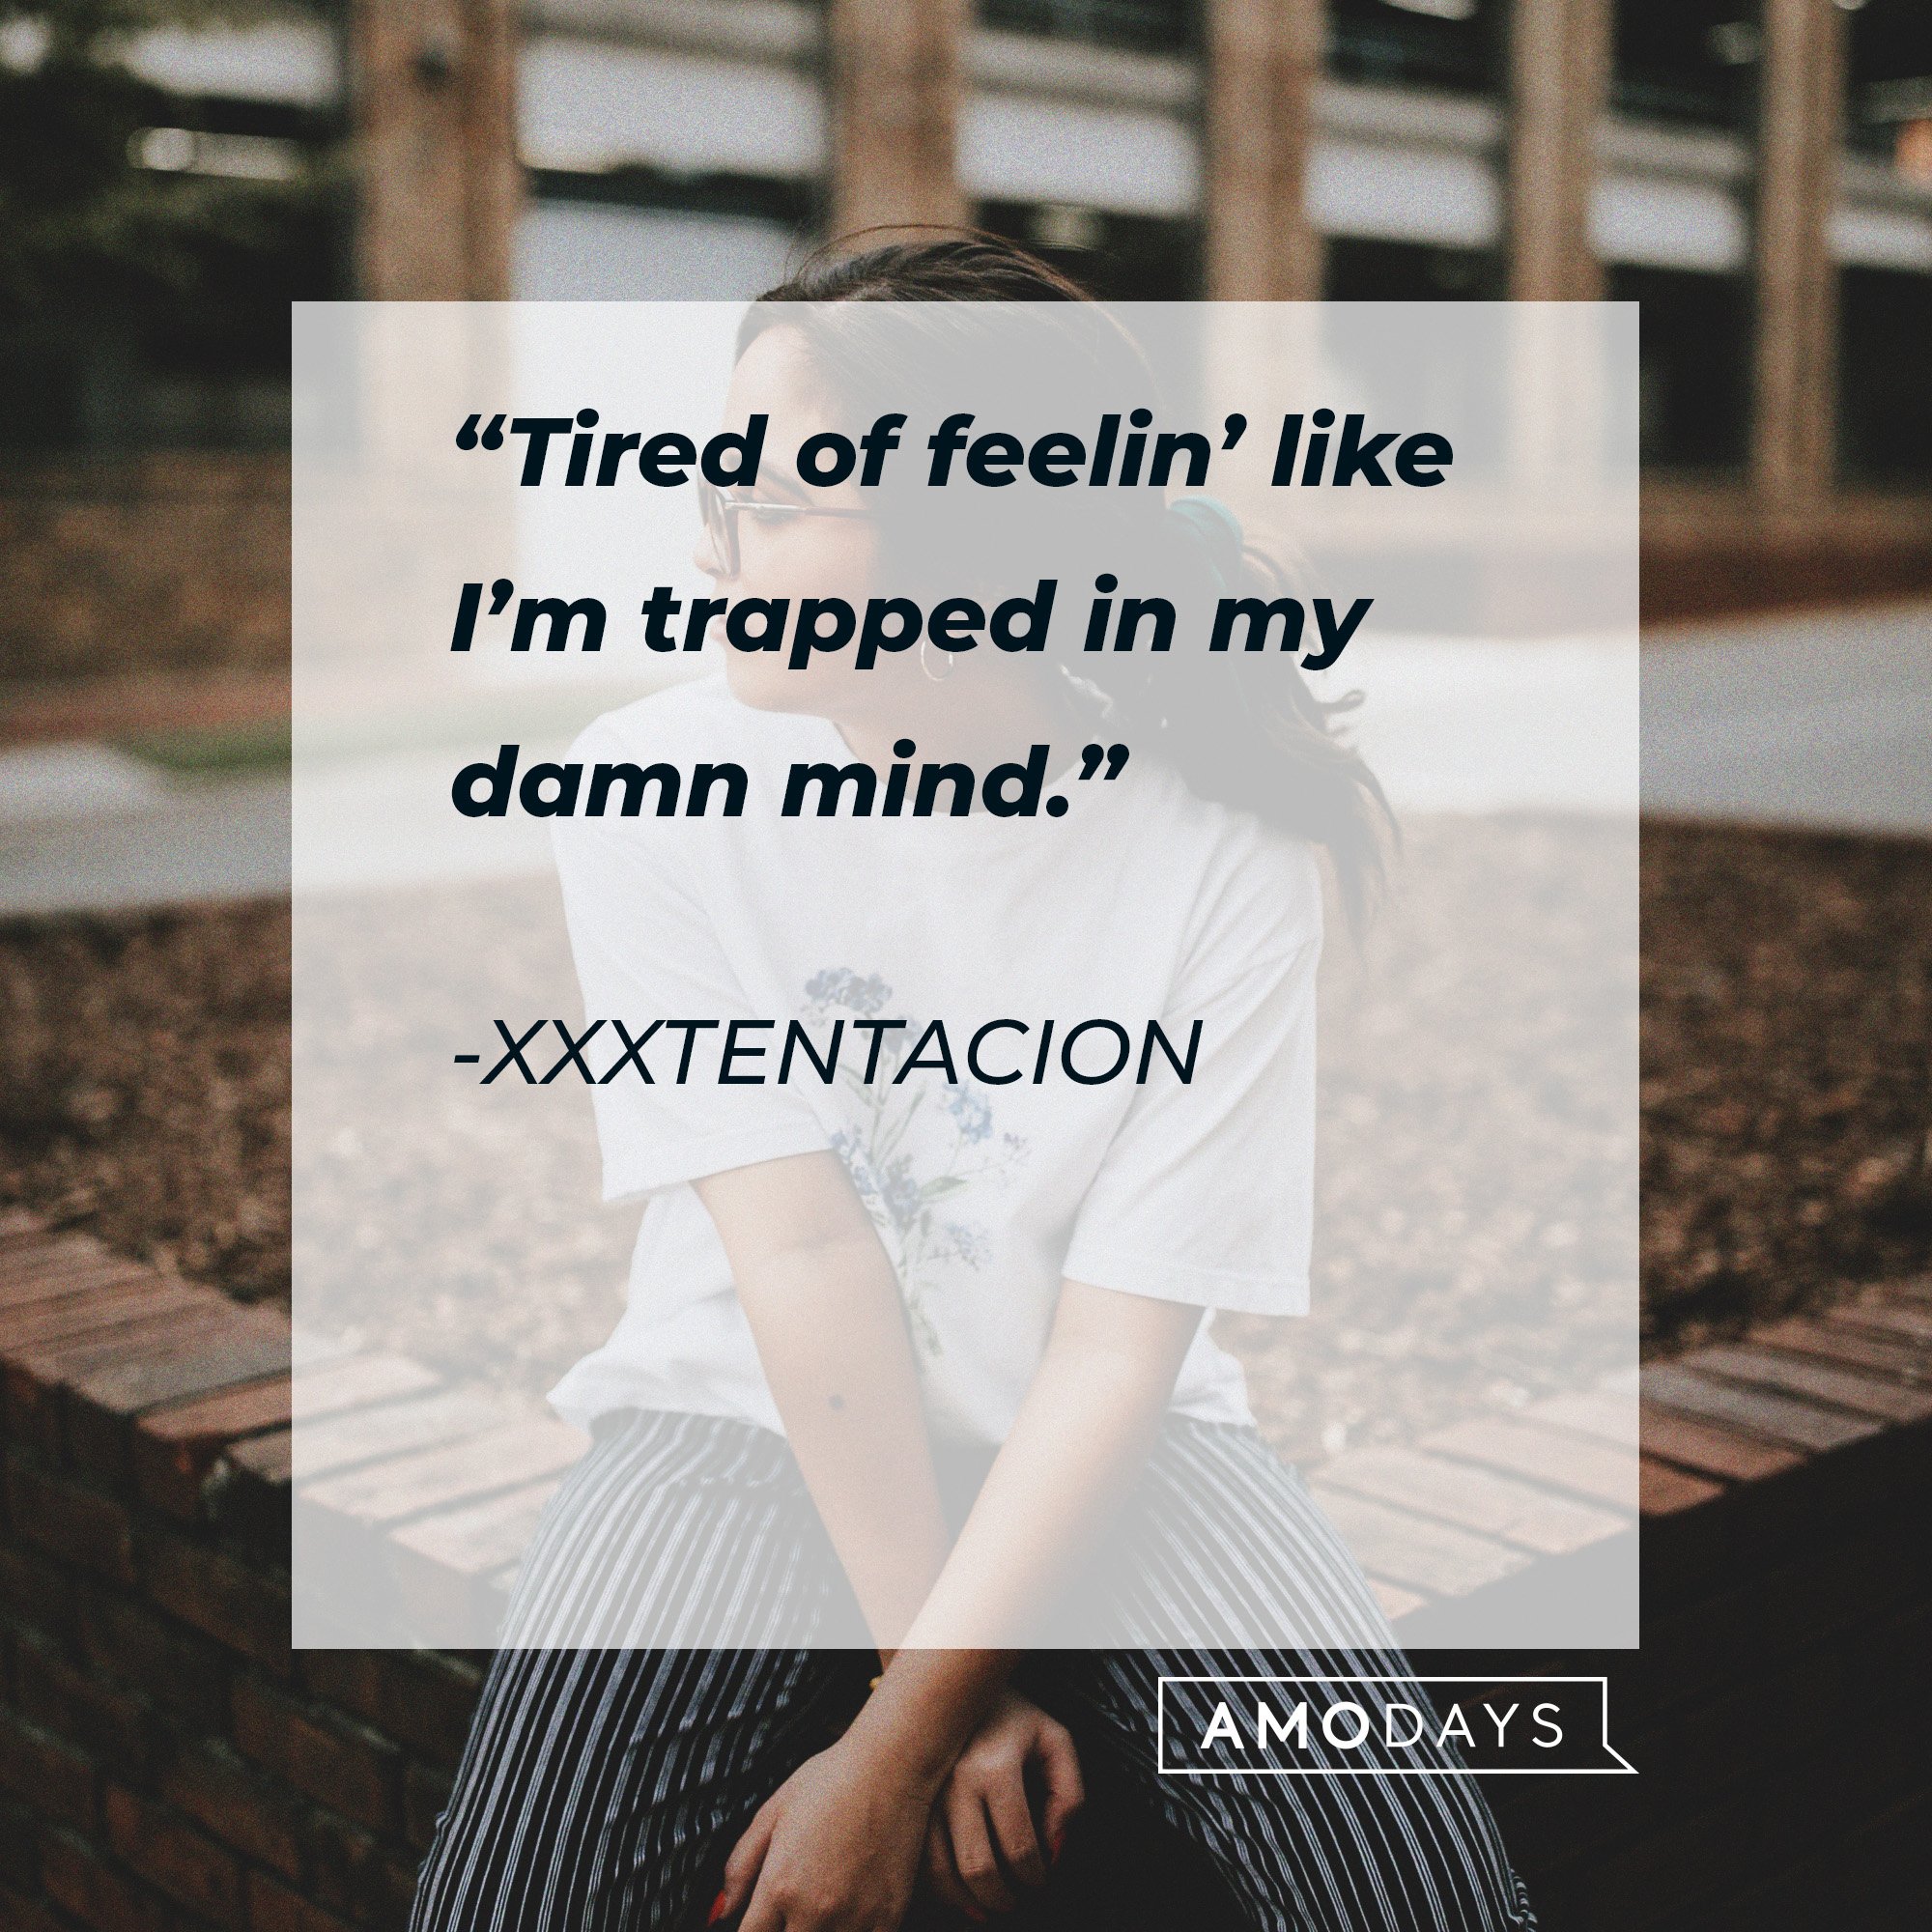 Xxxtentacion’s quote: “Tired of feelin’ like I’m trapped in my damn mind.” | Image: AmoDays